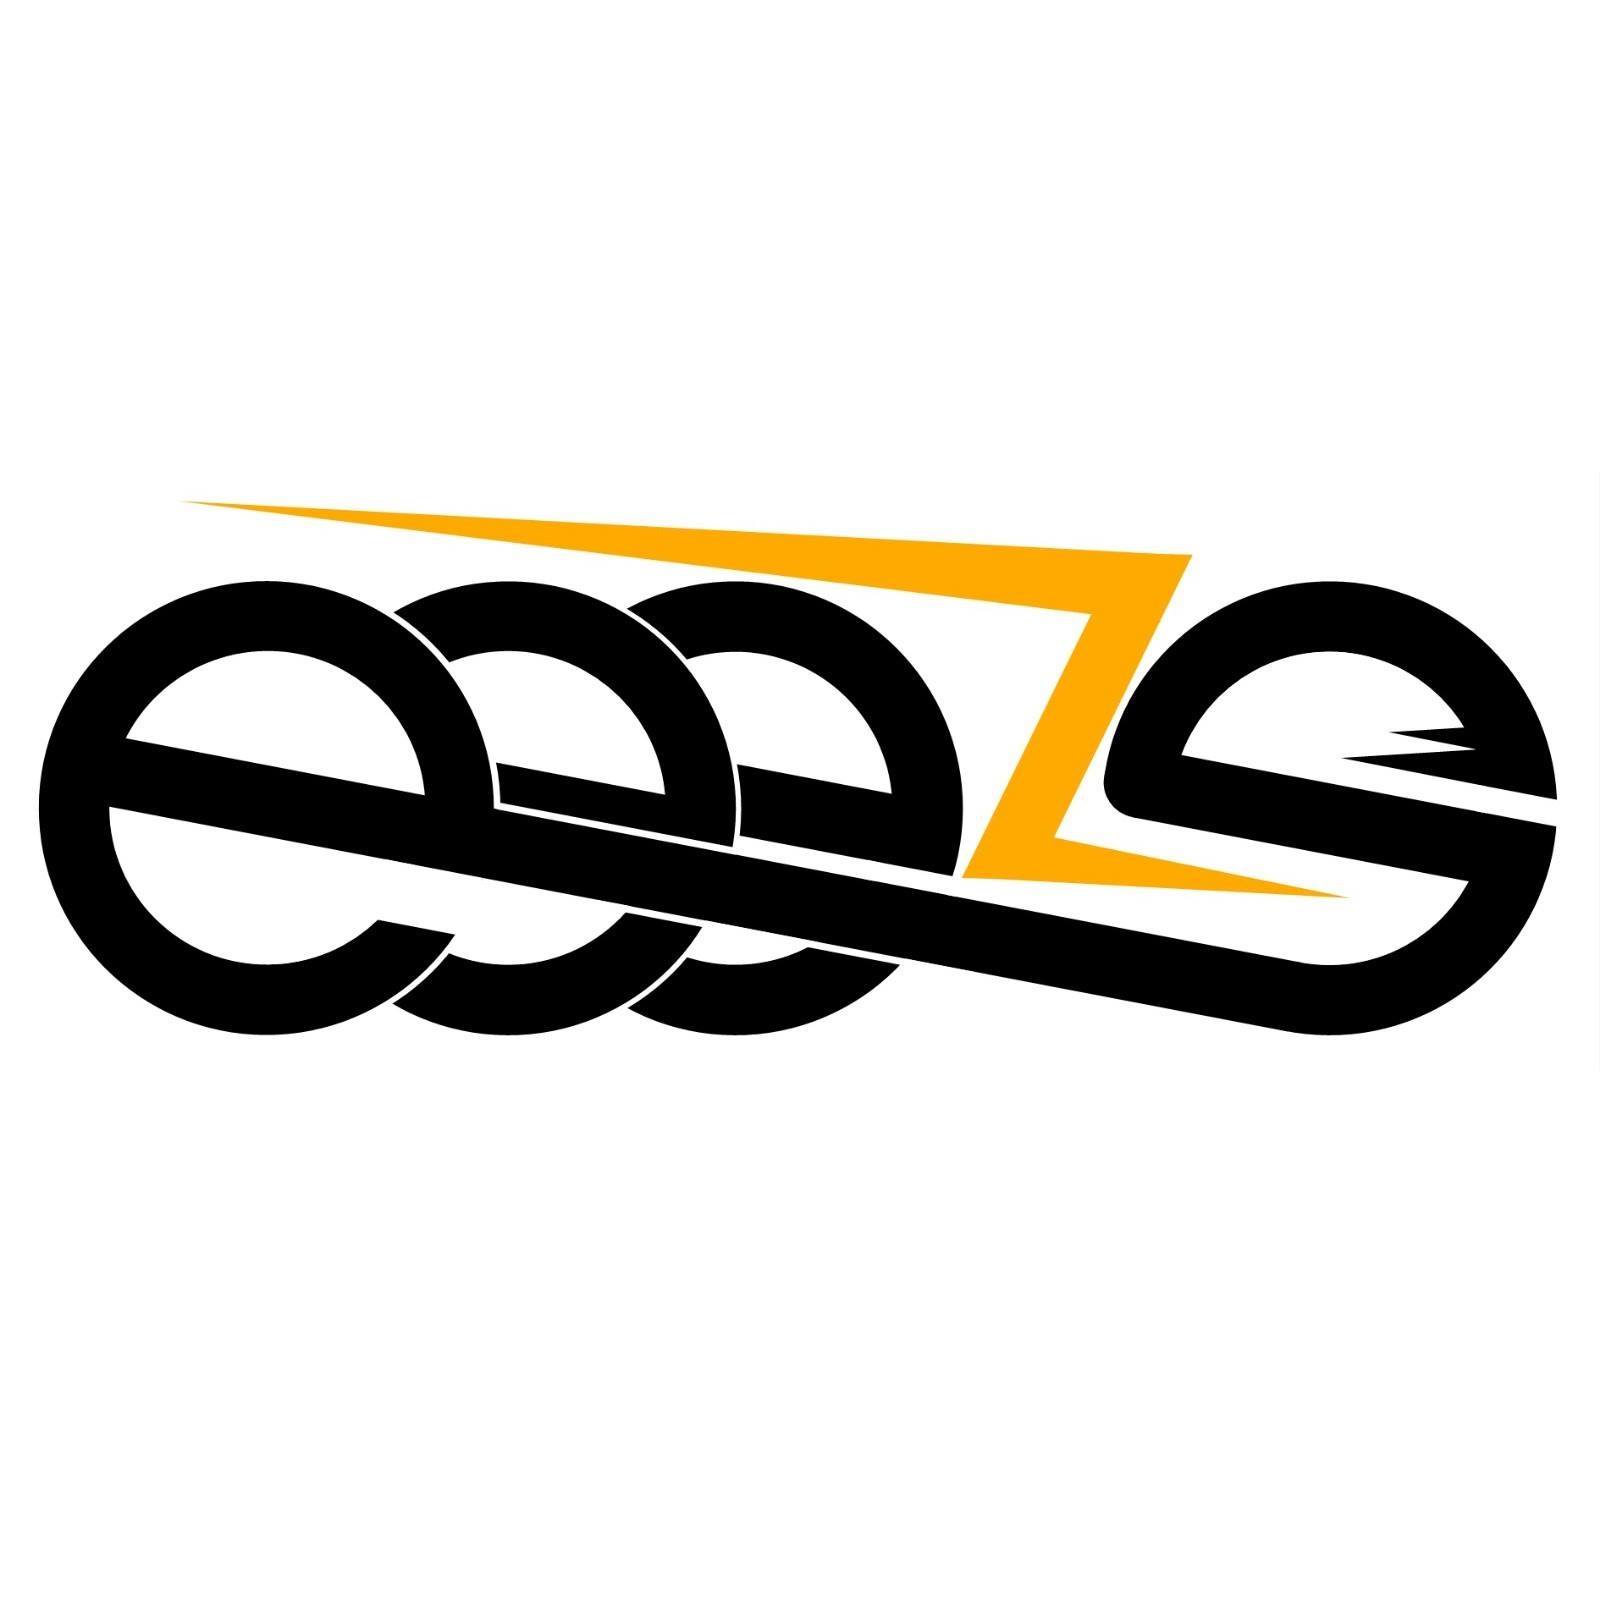 Logo of Electrical and Electronic Engineering Society